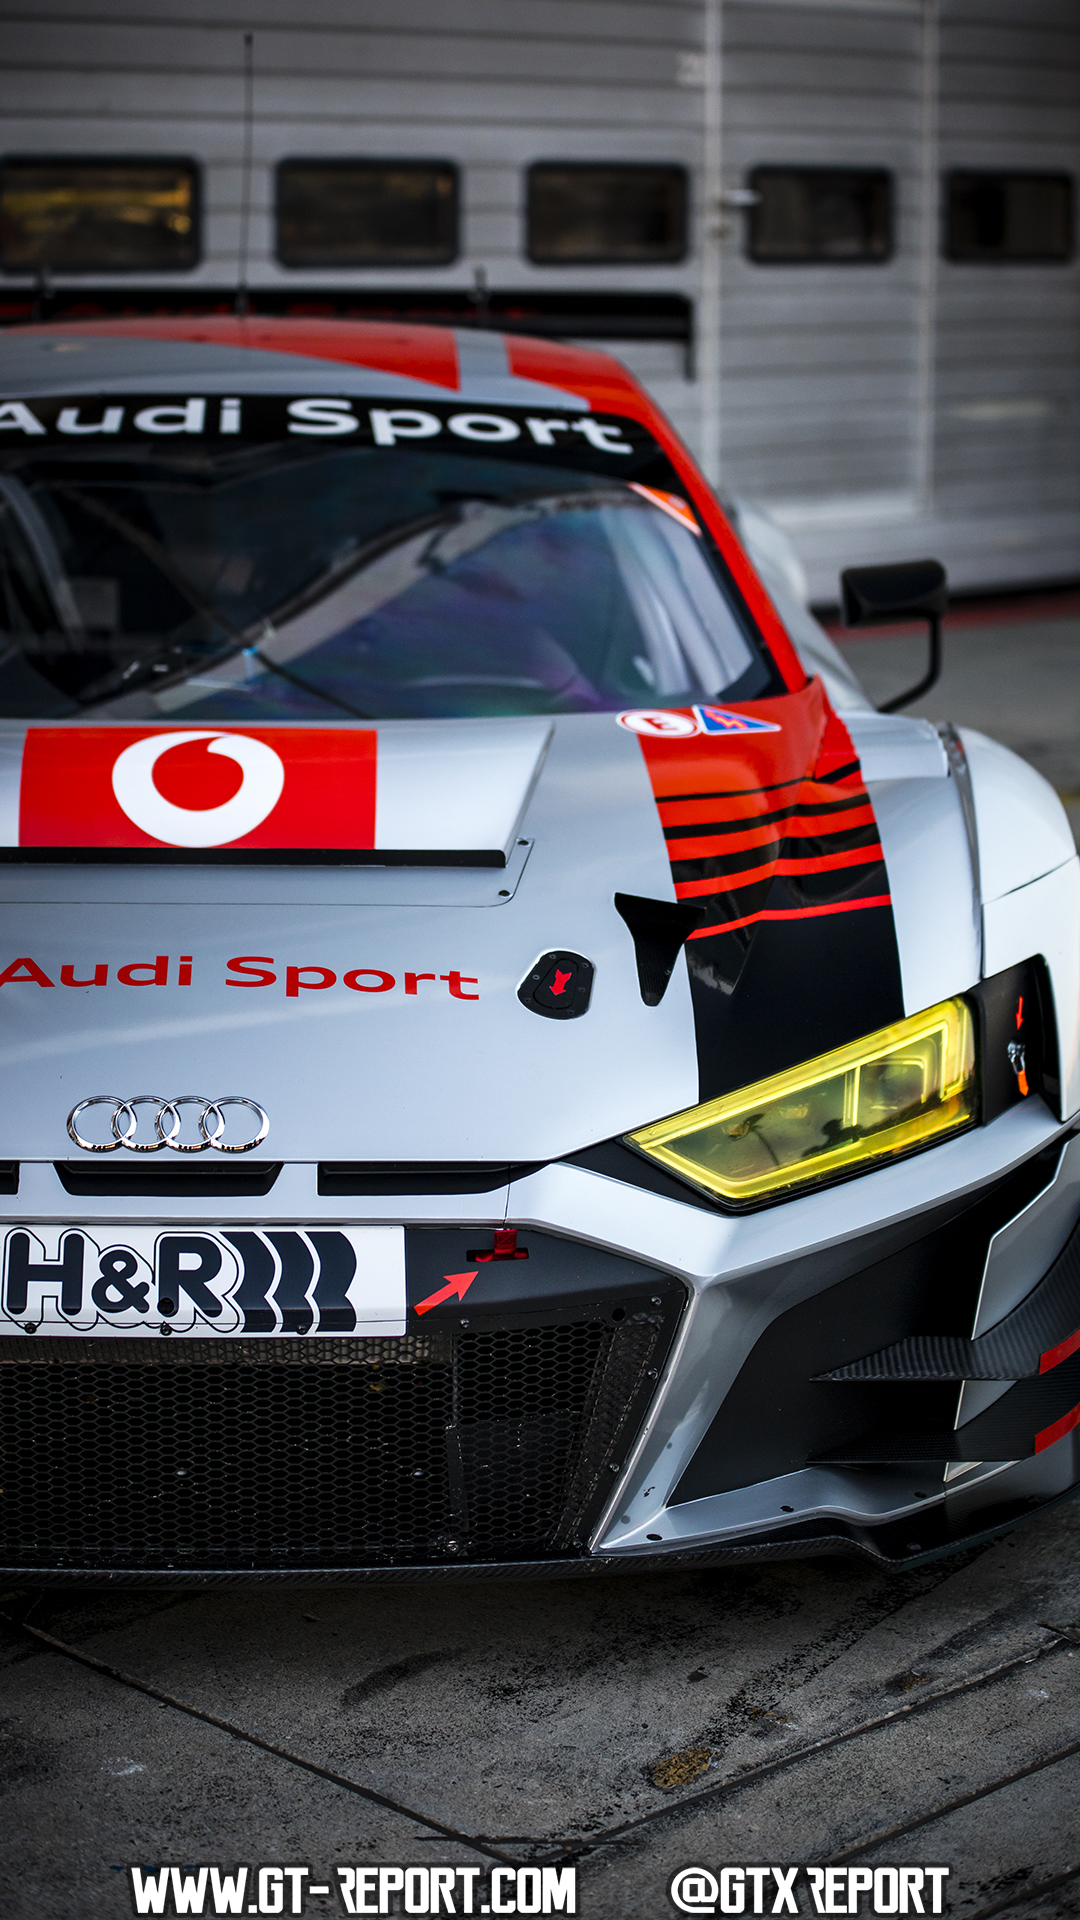 Audi R8 Lms Wallpapers